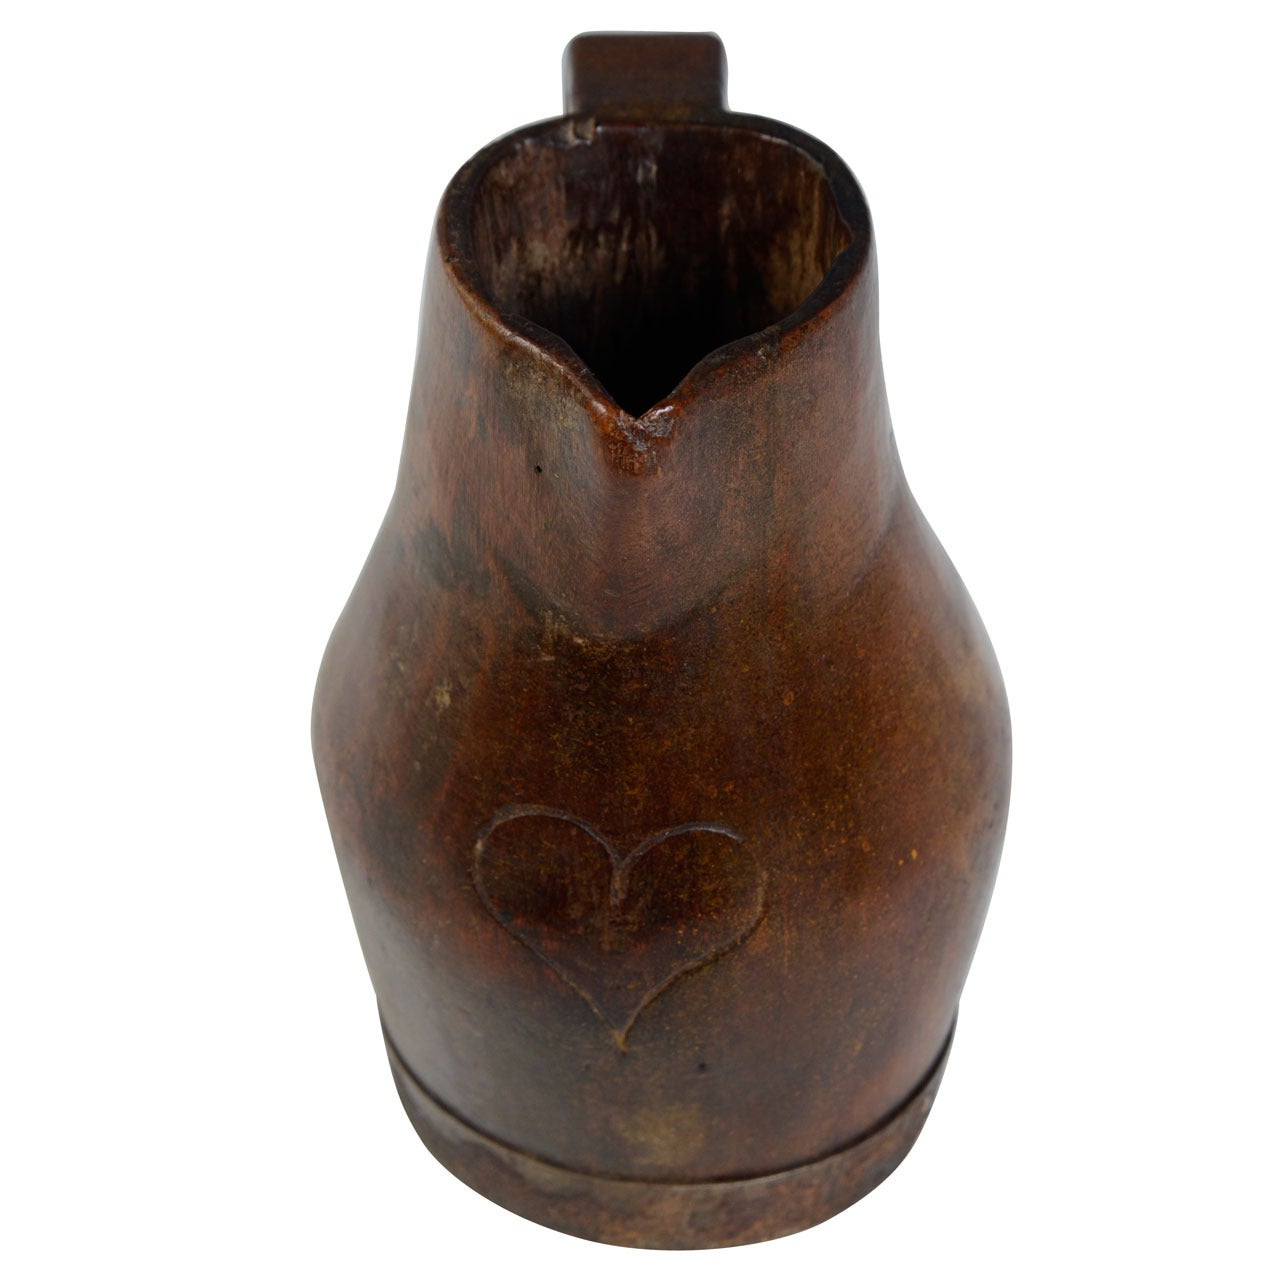 19th Century French Carved Wooden Jug